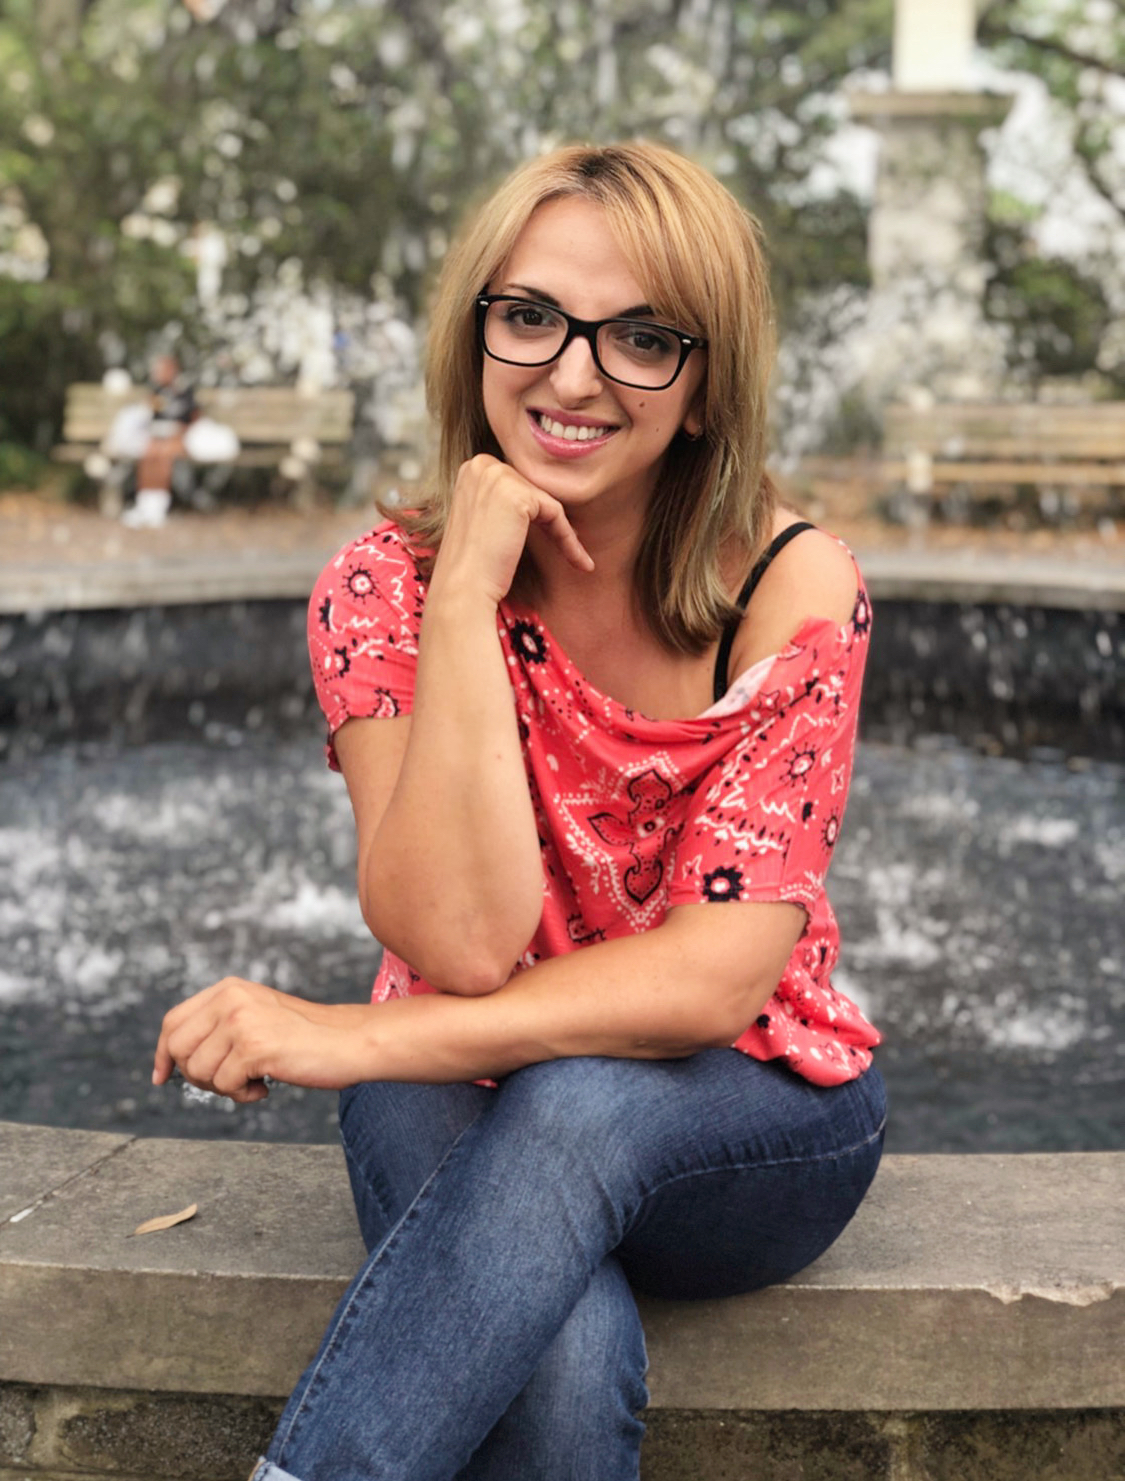 Smiling woman with shoulder-length light brown hair, wearing dark glasses, pink/red shirt and blue jeans, sitting by fountain (blurry trees in background)